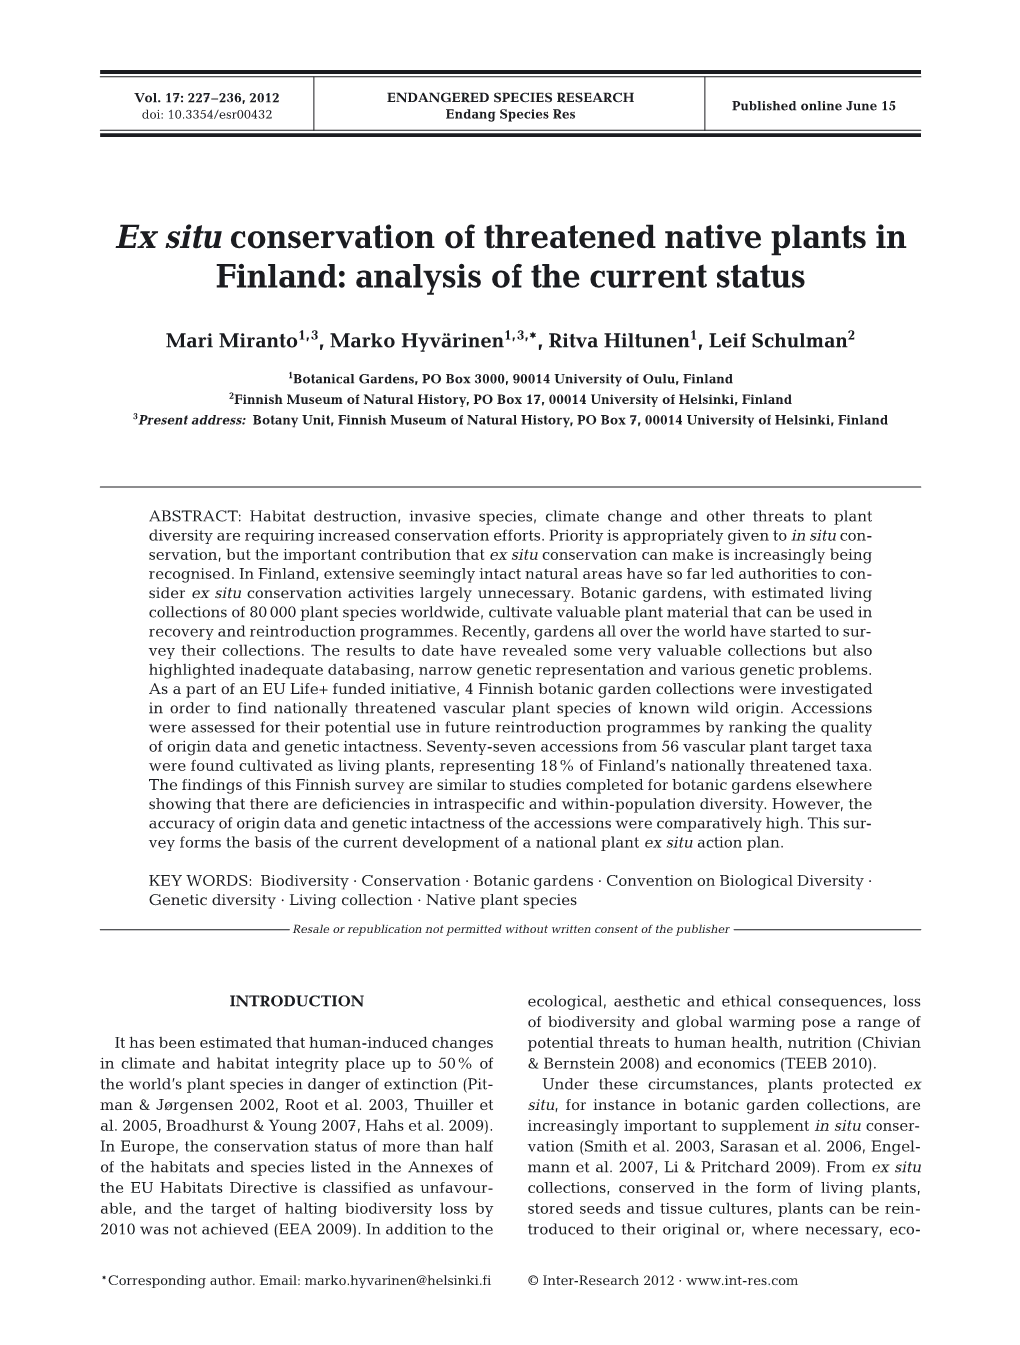 Ex Situ Conservation of Threatened Native Plants in Finland: Analysis of the Current Status